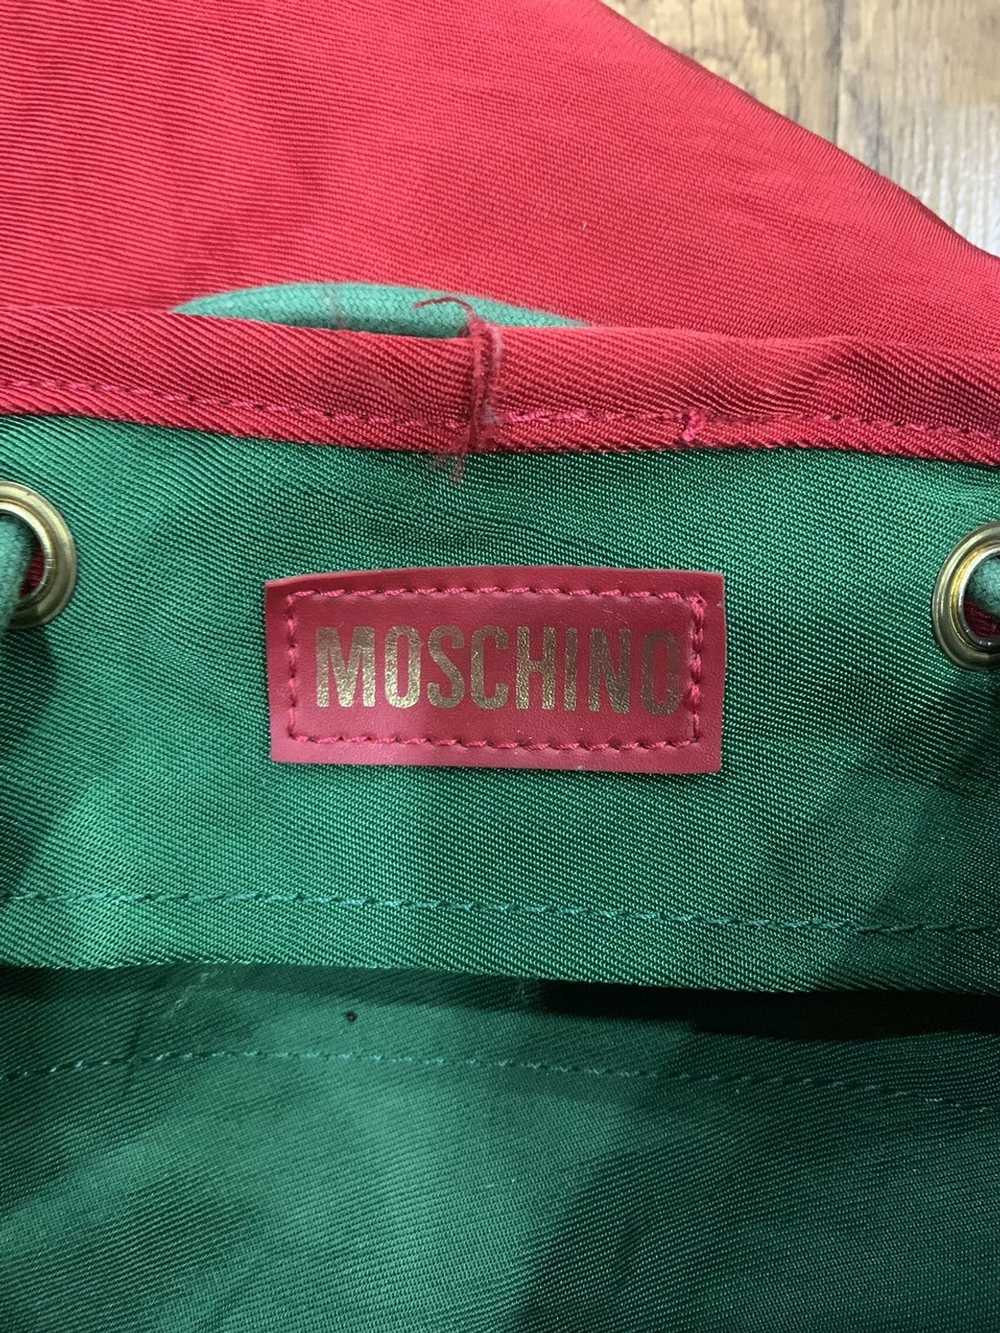 Moschino × Vintage Authentic MOSCHINO backpack - image 8